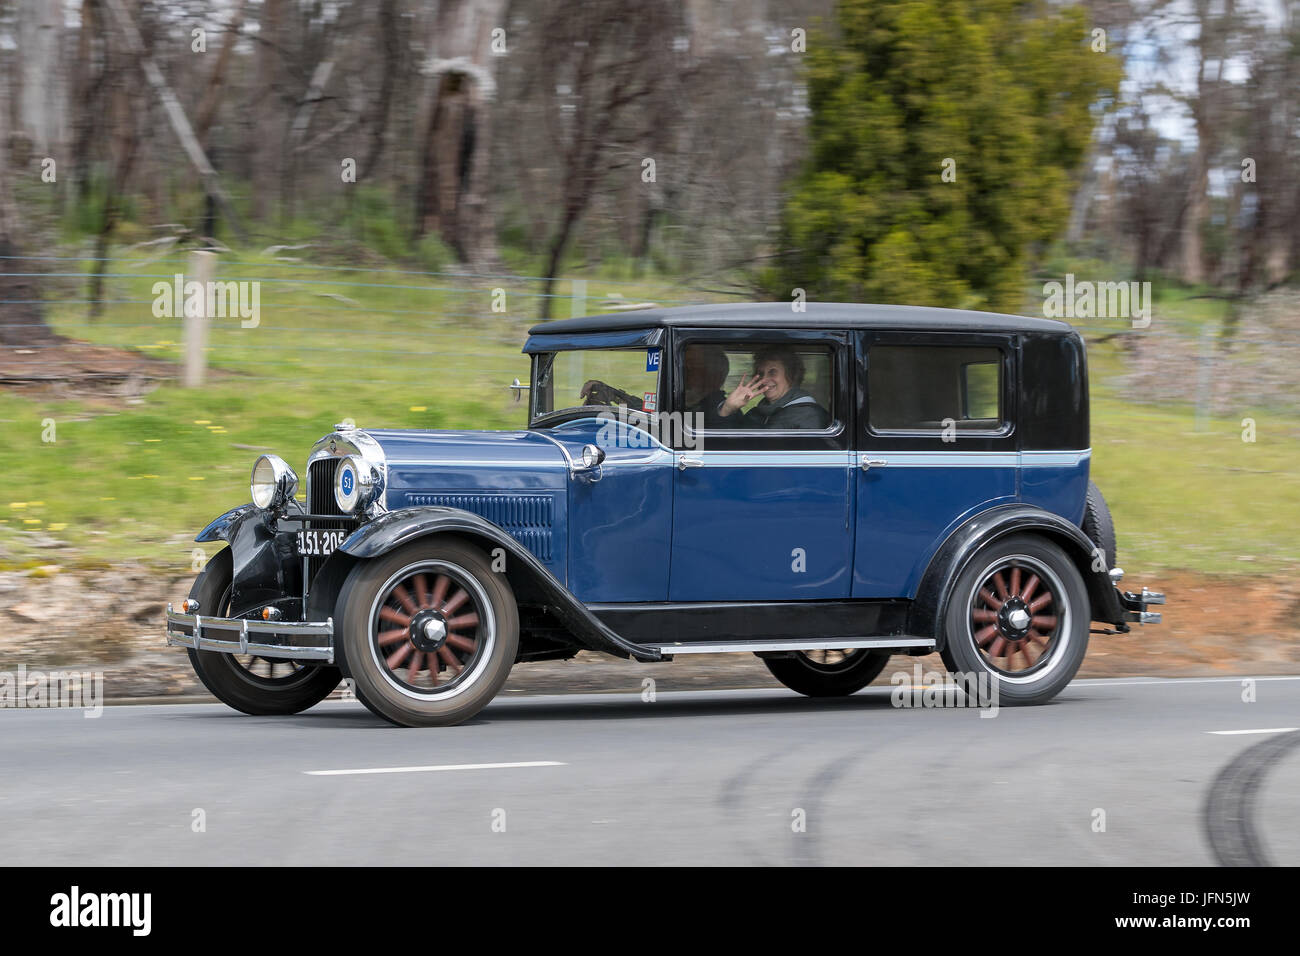 Vintage 1929 Essex Challenger Sedan driving on country roads near the town of Birdwood, South Australia. Stock Photo